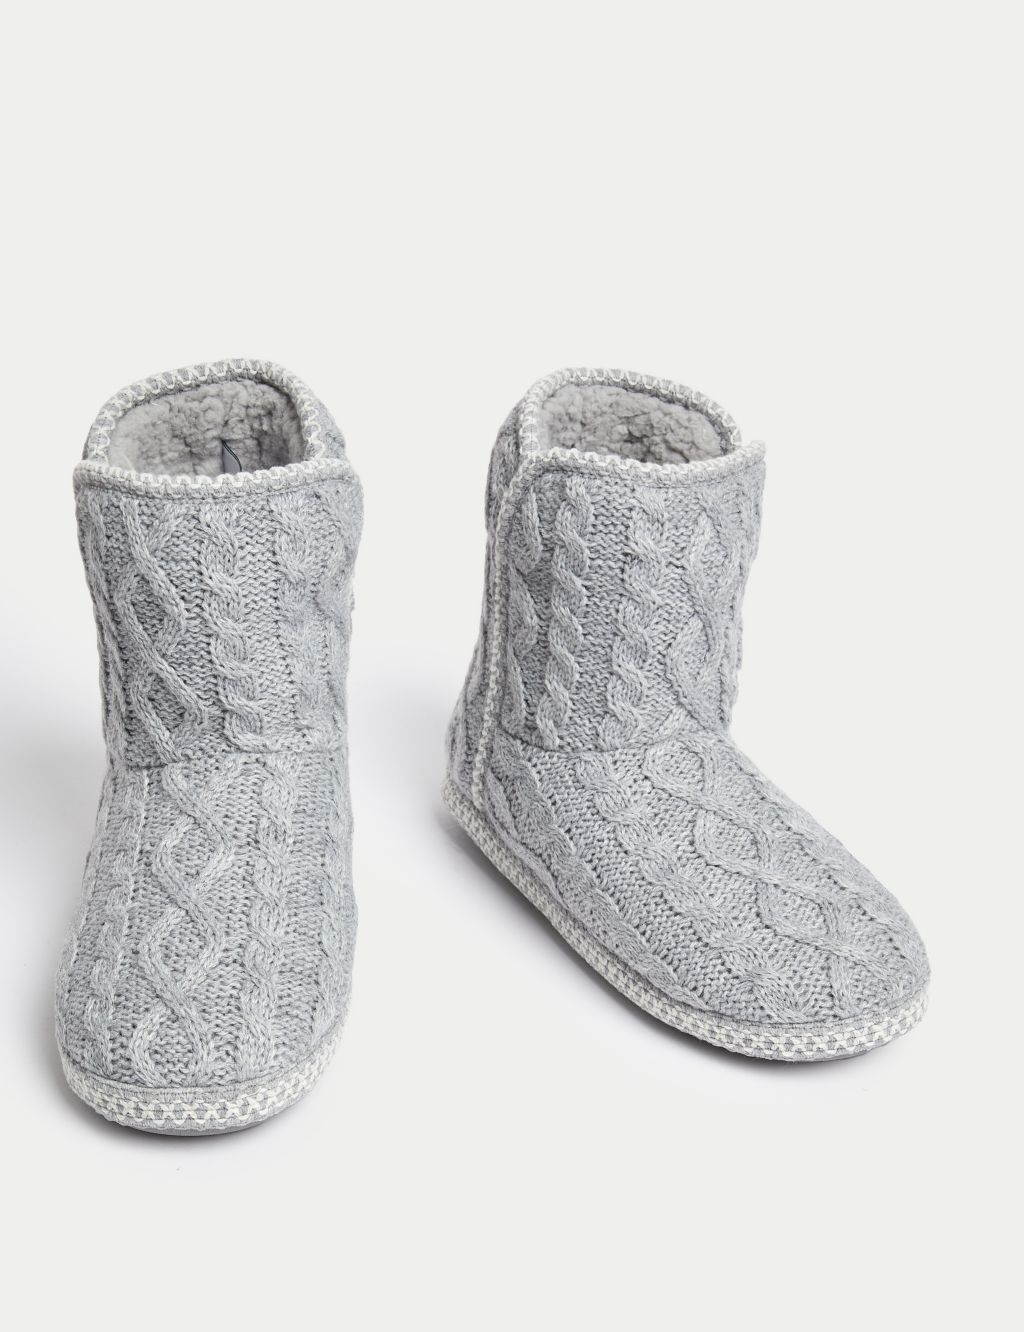 Cable Knit Slipper Boots image 2